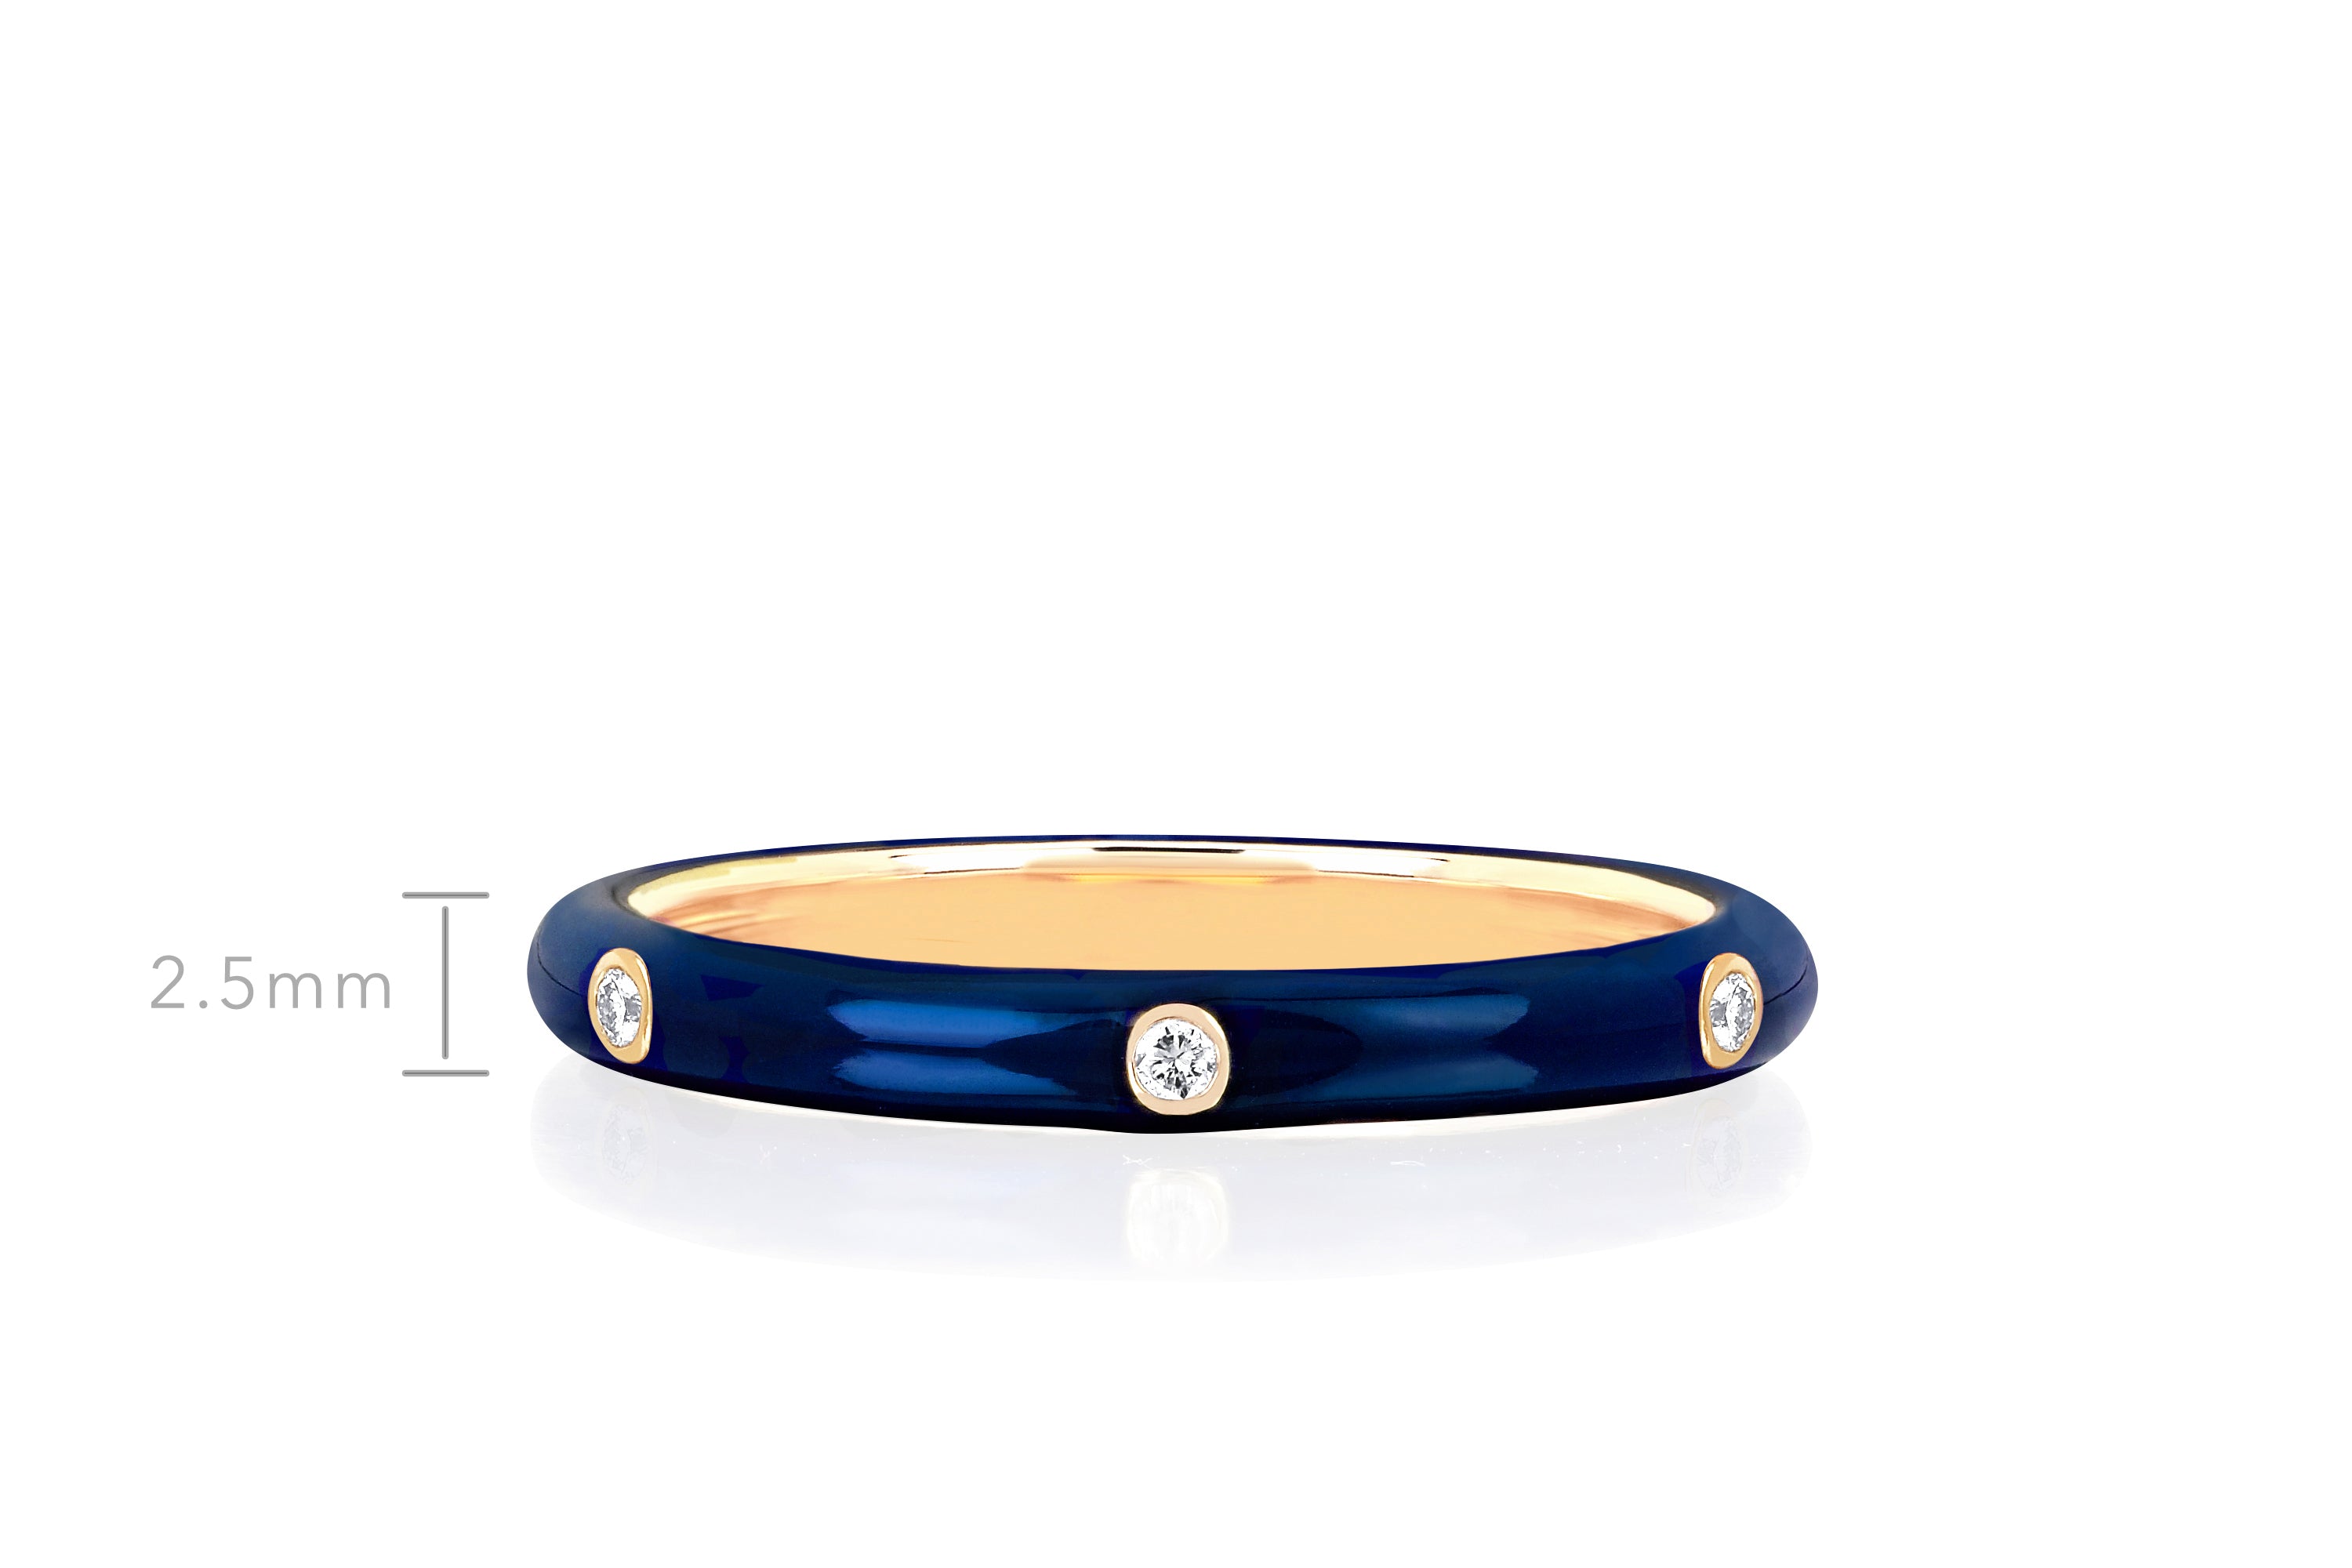 3 Diamond Navy Enamel Stack Ring in 14k yellow gold with size measurement of 2.5mm in height